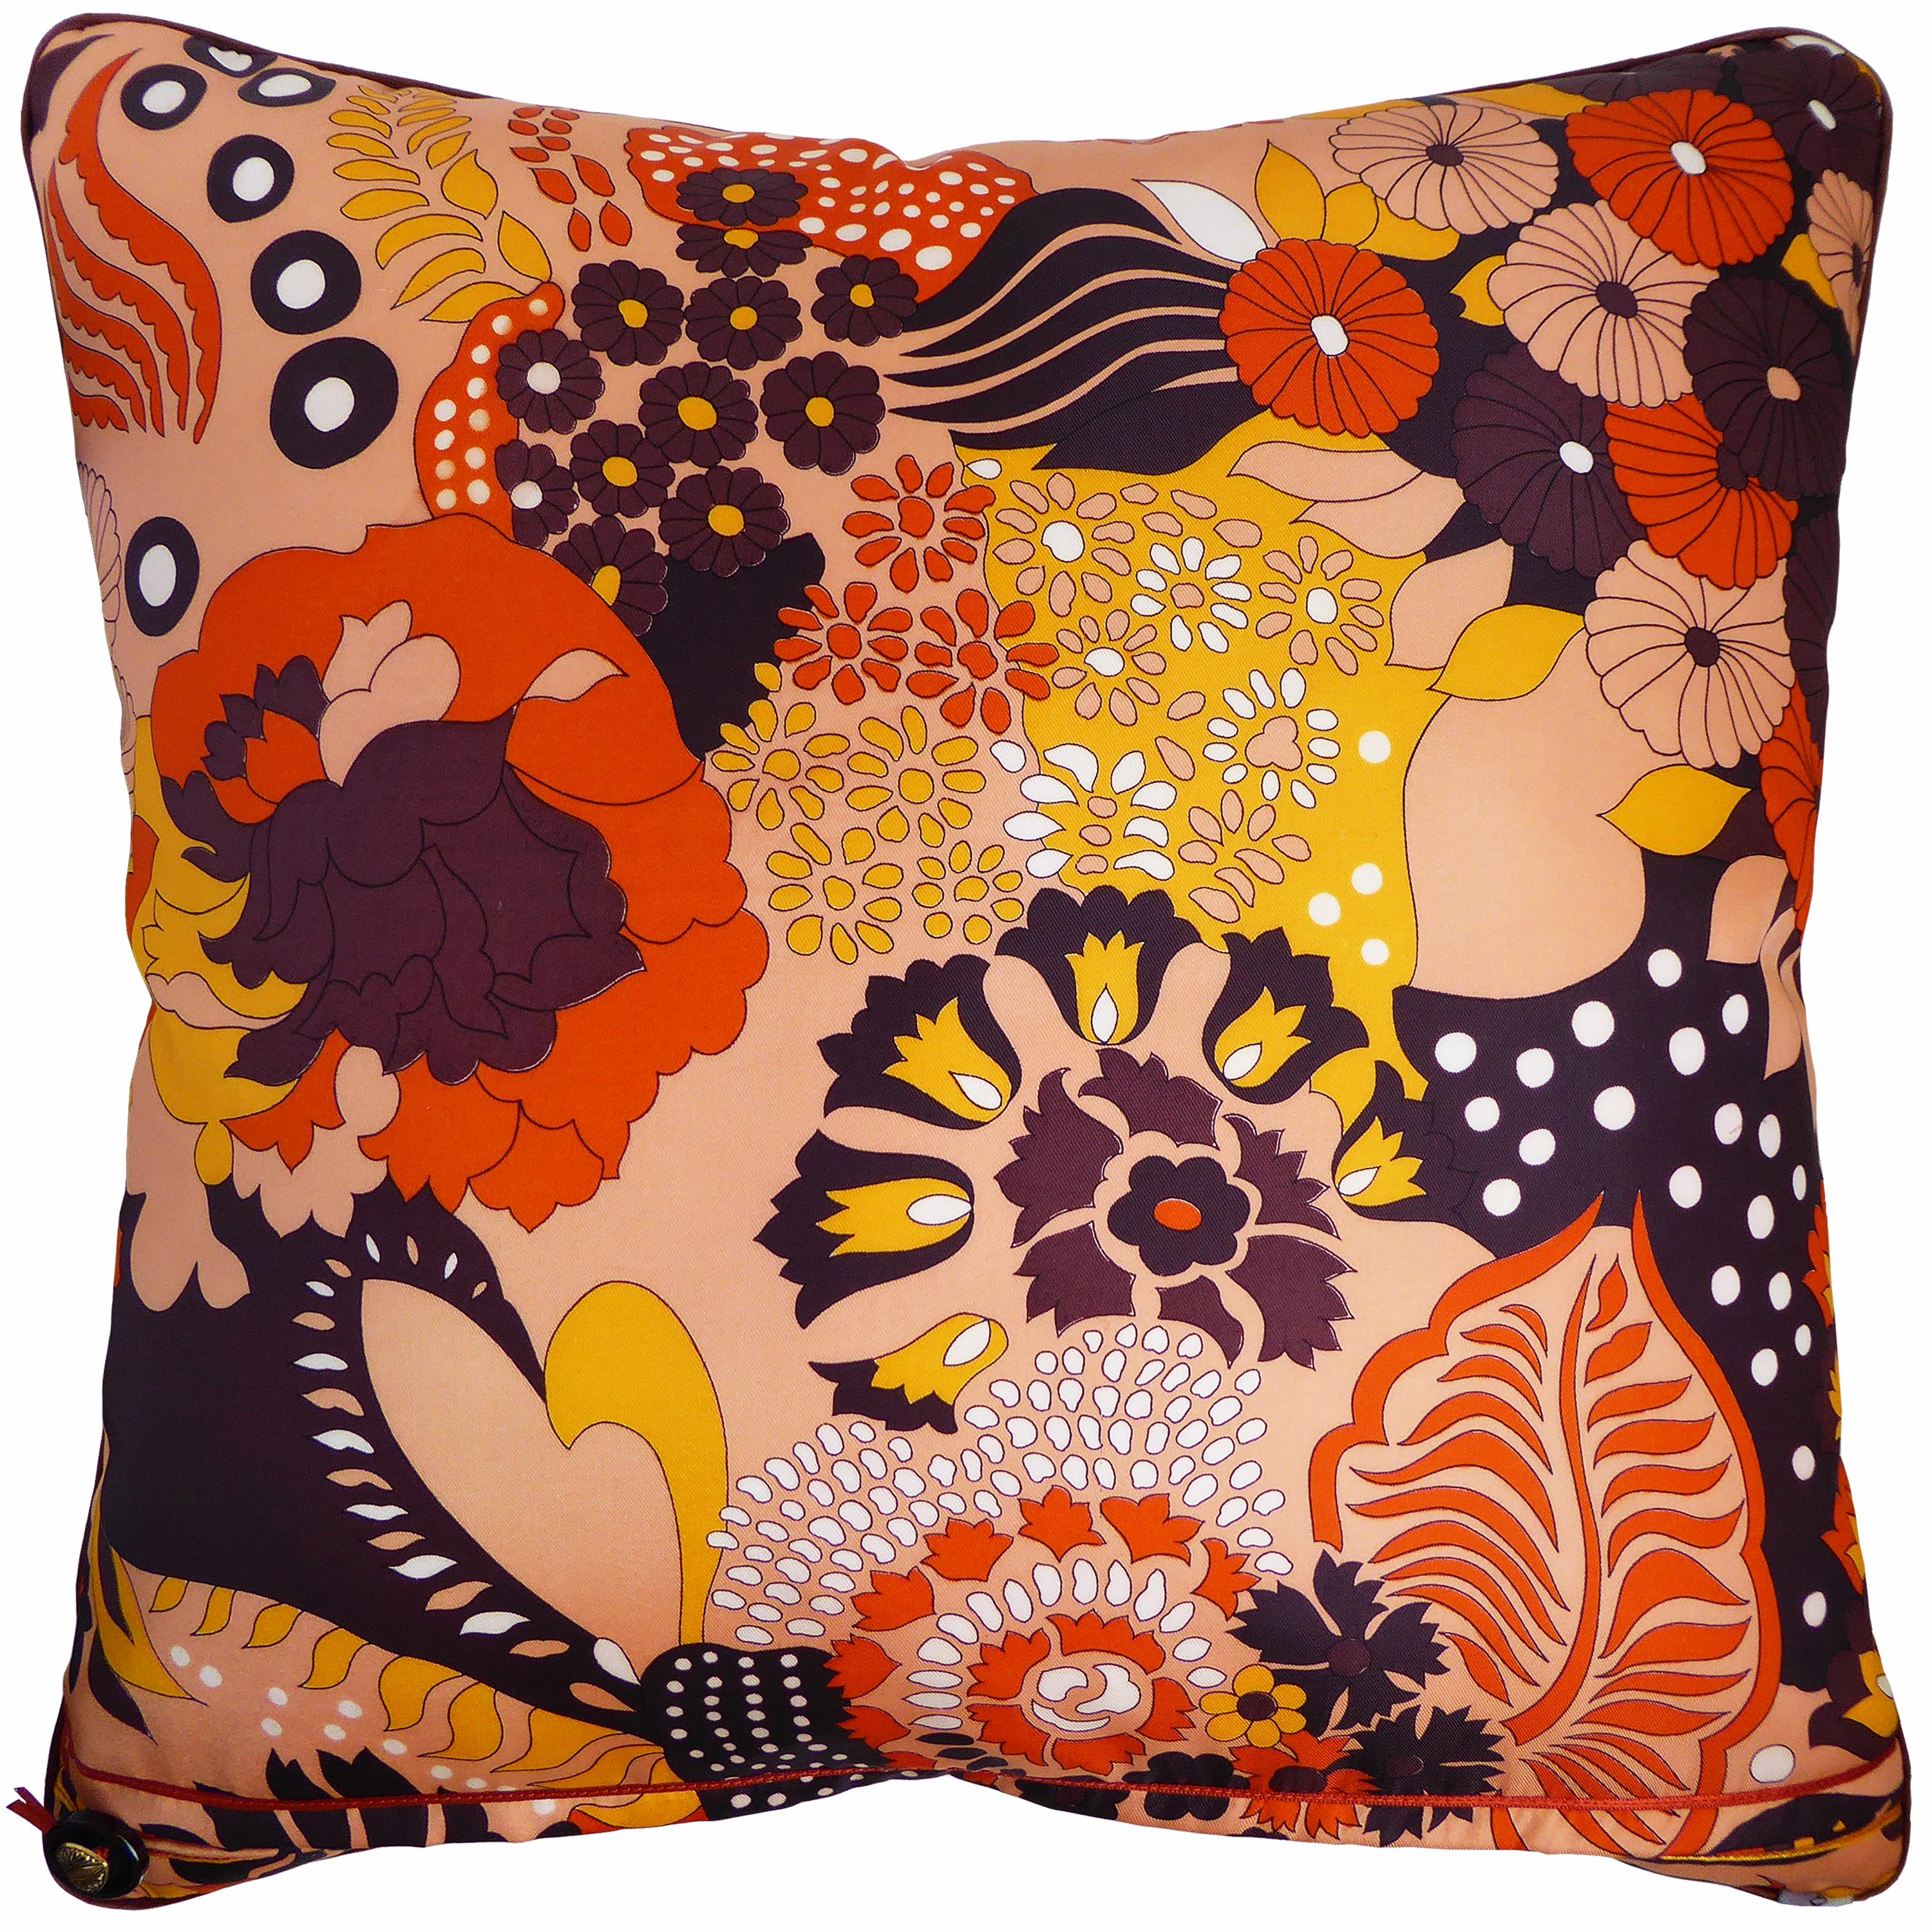 'Modele Despose',
circa 1980
British bespoke made luxury cushion created using beautiful silks in a strong color palette featuring glorious graphics and floral images
Provenance: France and Britain
Made by Nichollette Yardley-Moore
Vintage